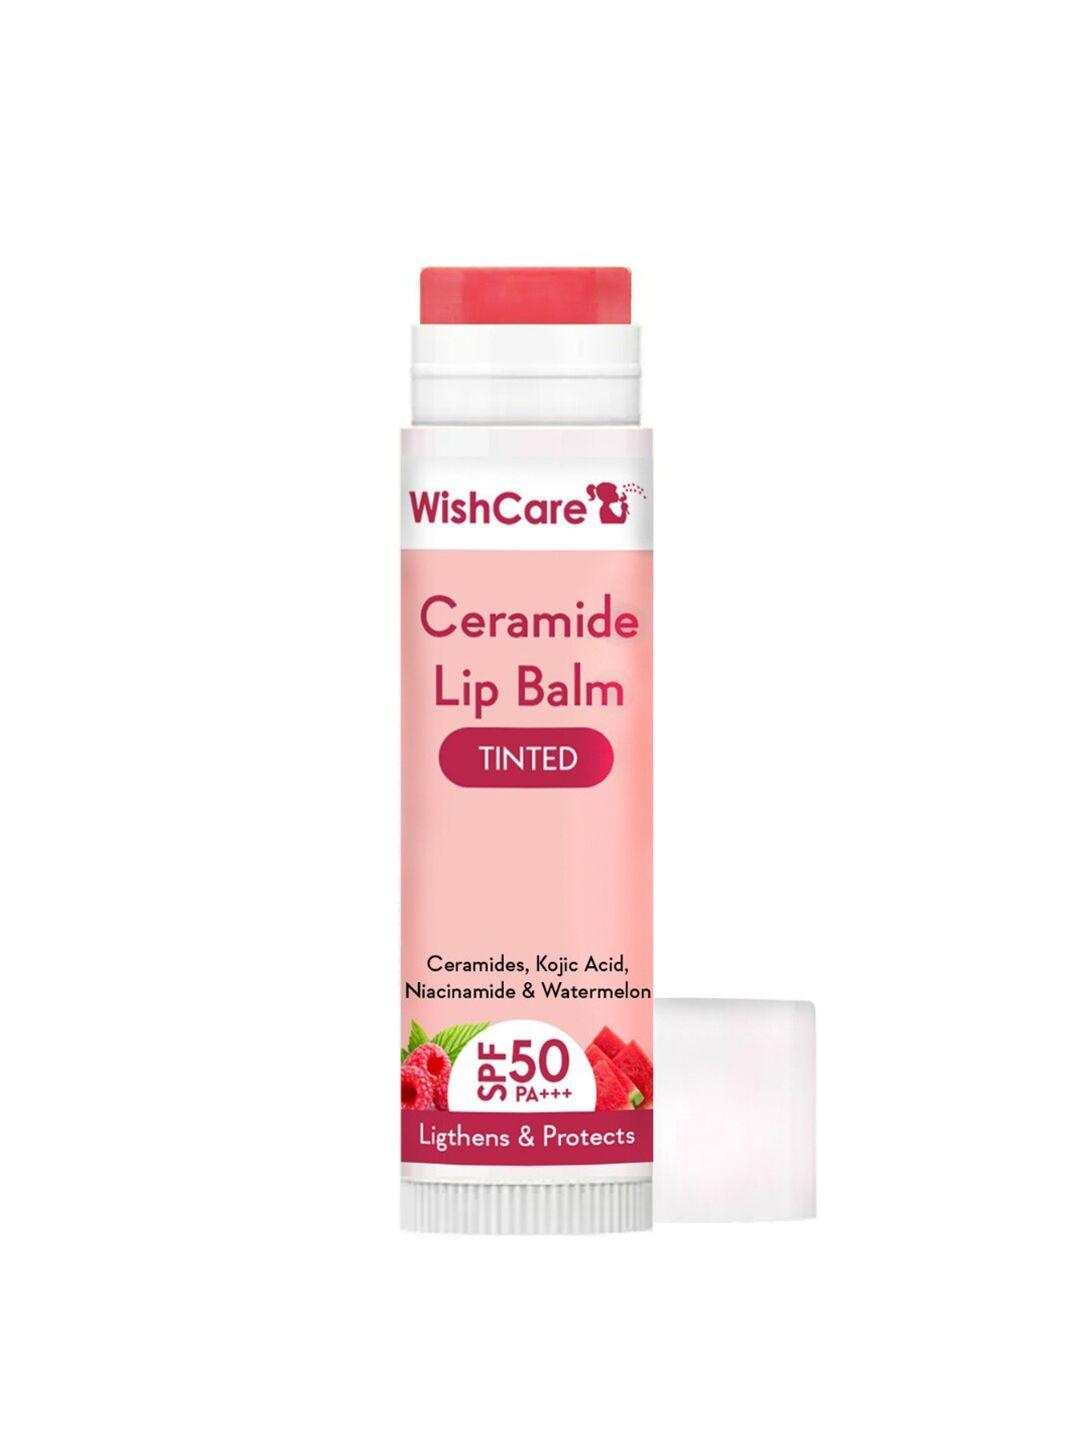 wishcare-ceramide-tinted-lip-balm-with-spf50-pa+++---5g